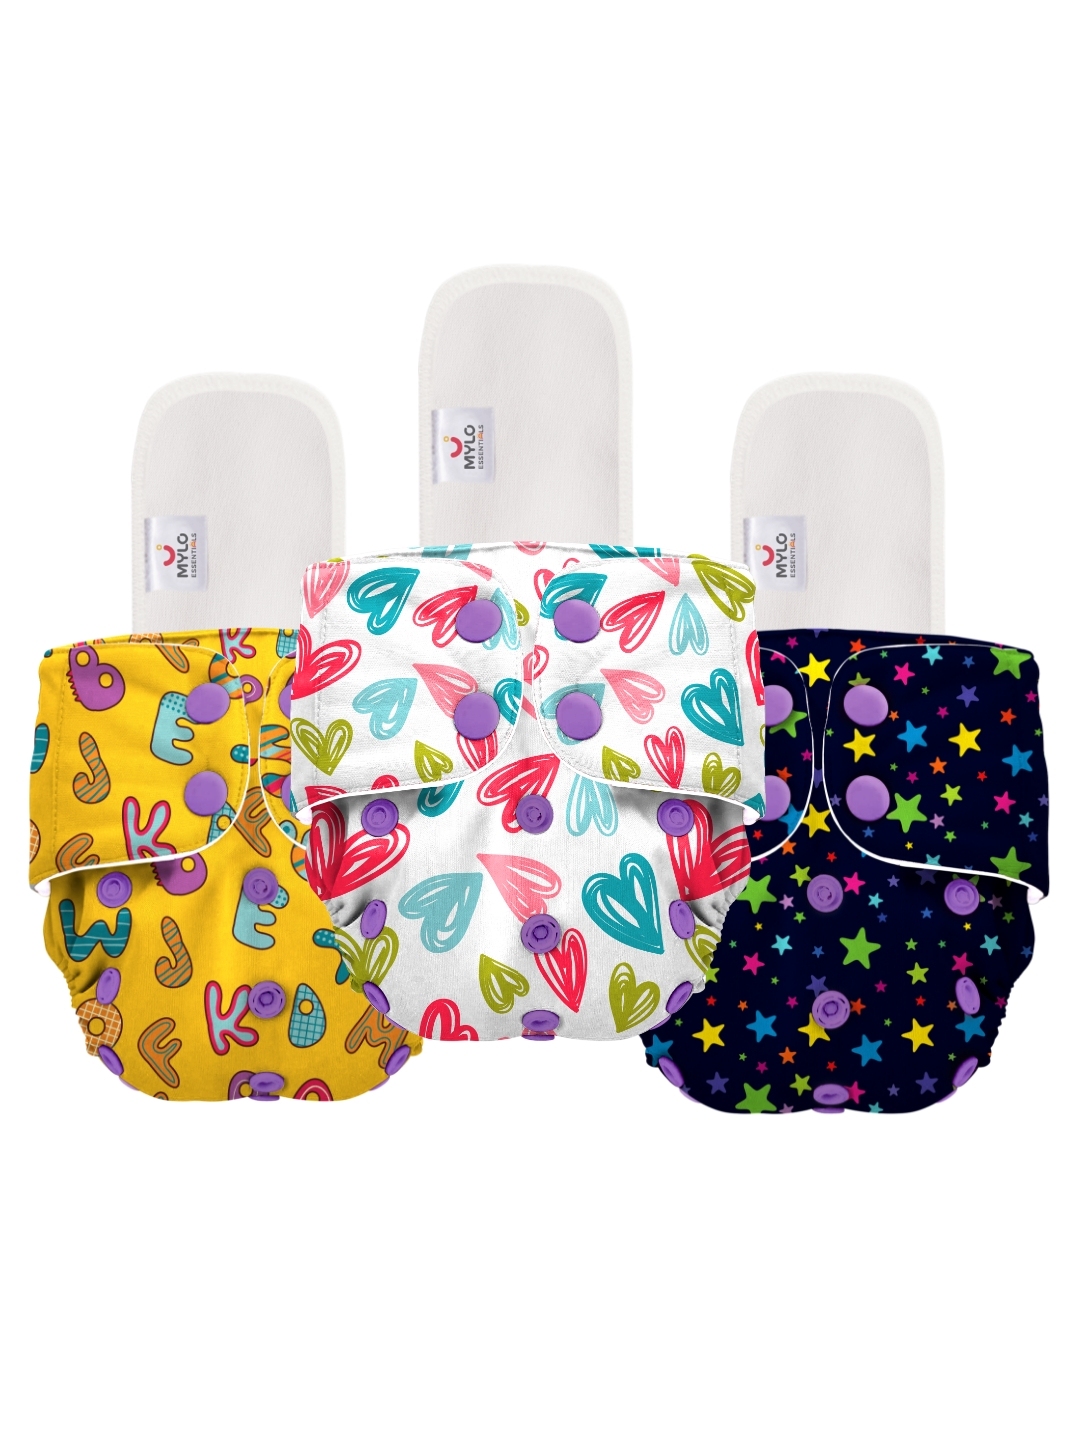 Buy MYLO Essentials Free Size Reusable Cloth Diaper with Absorbent